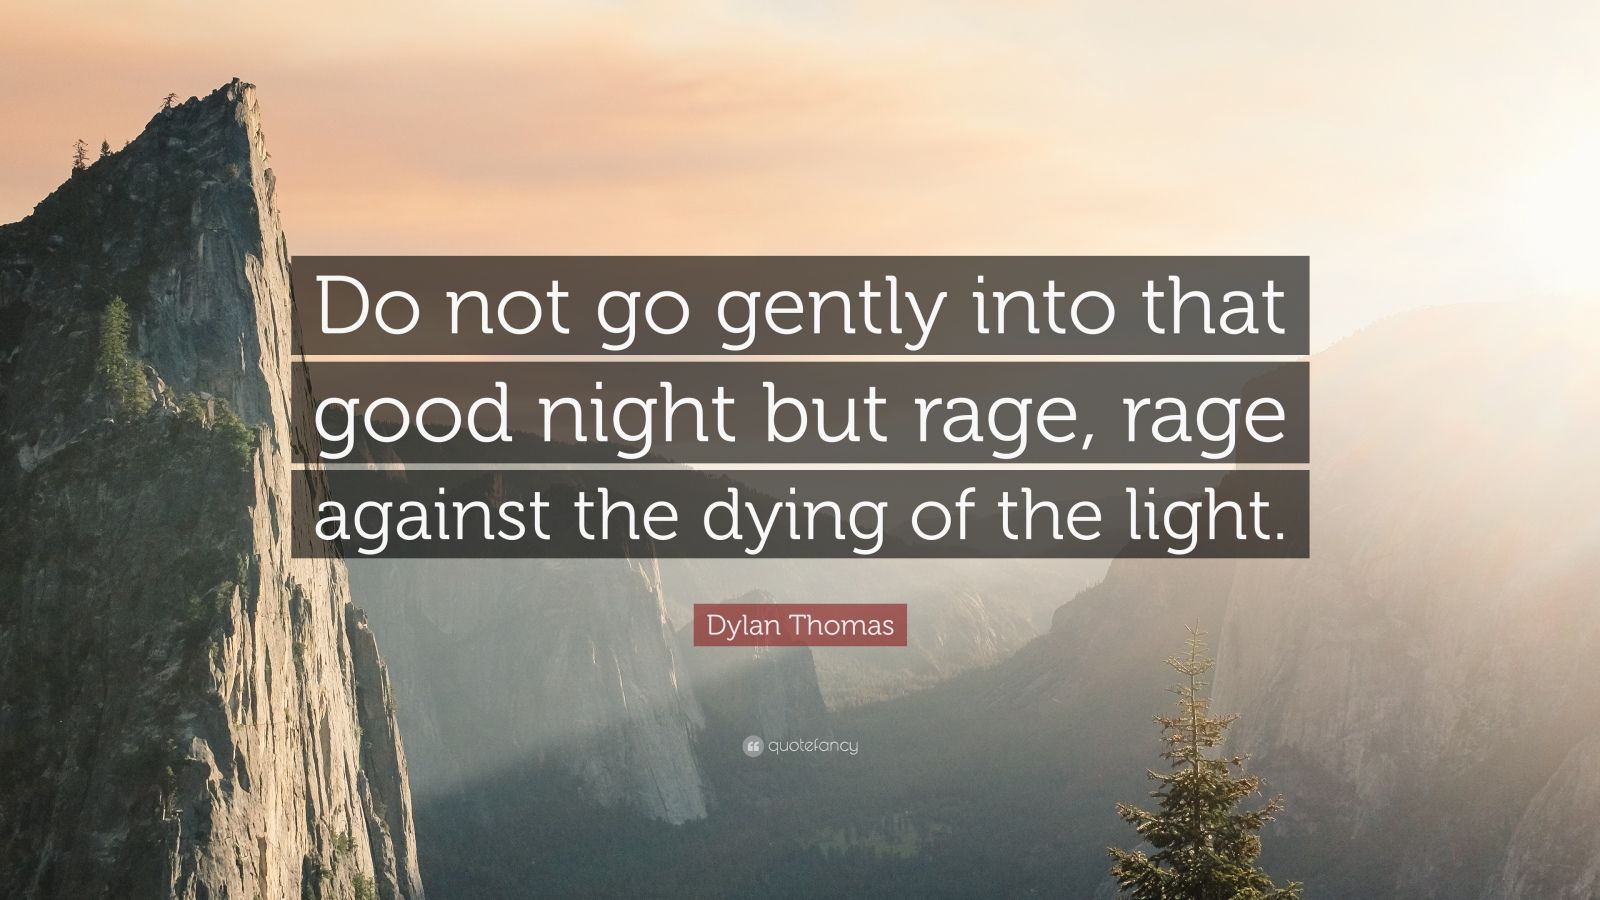 Do not go gentle into that good night by dylan thomas - numberjza